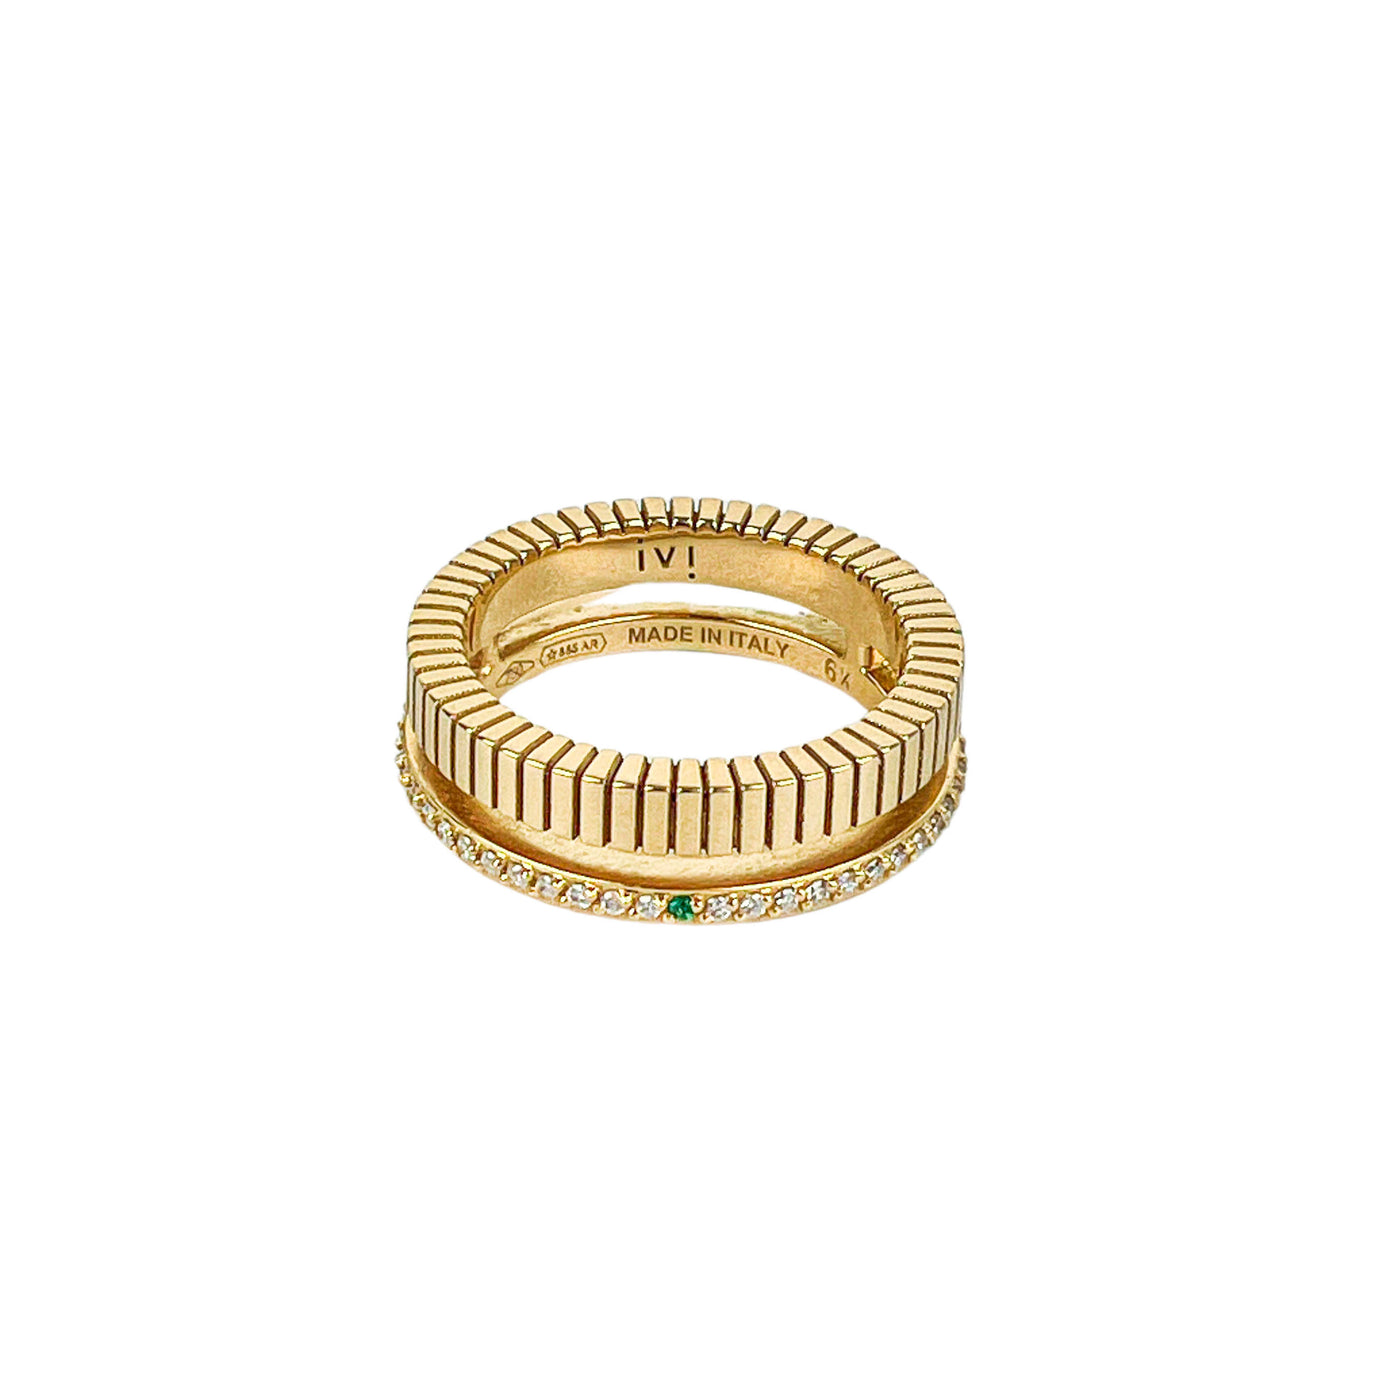 IVI Thin Slot Ring with Diamonds in Gold - Discounts on IVI at UAL